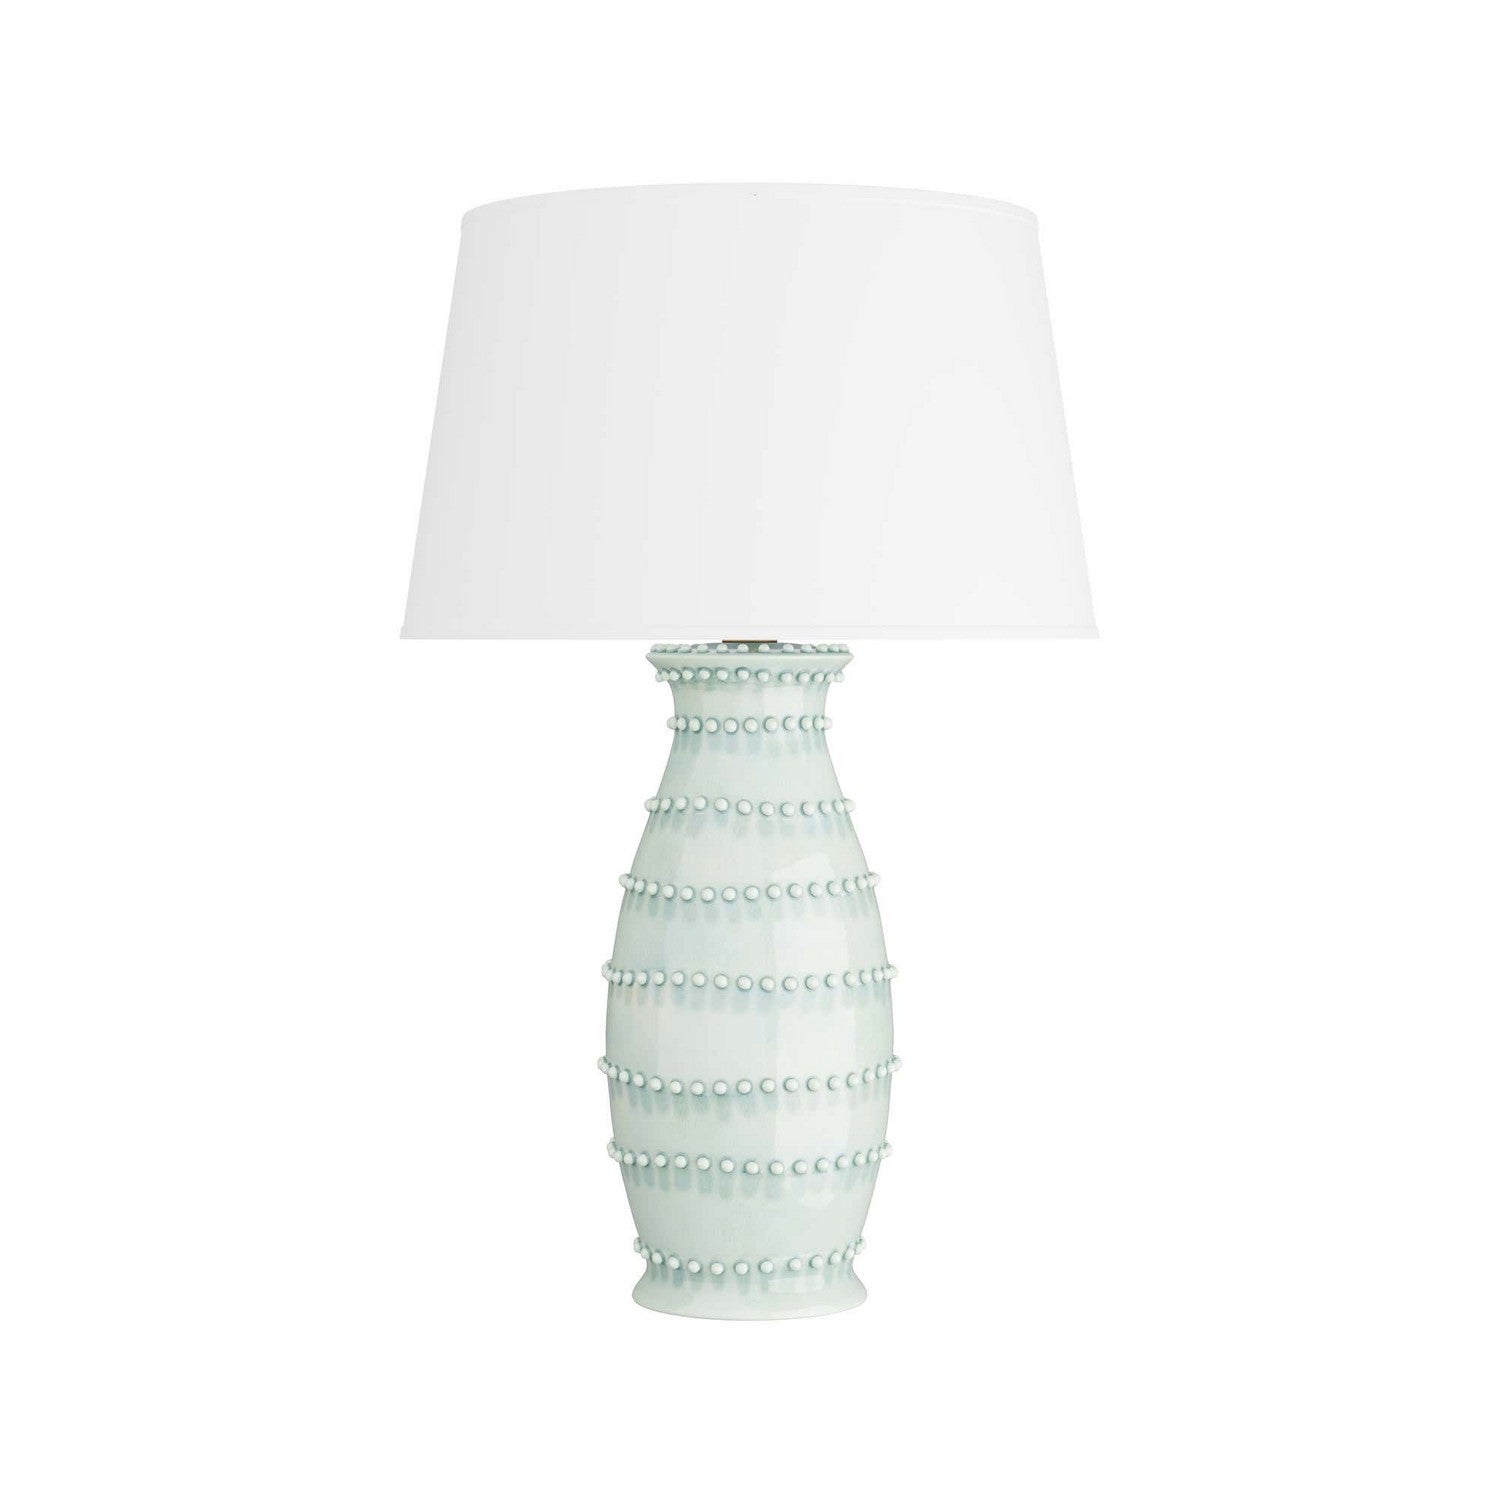 One Light Table Lamp from the Spitzy collection in Celedon finish